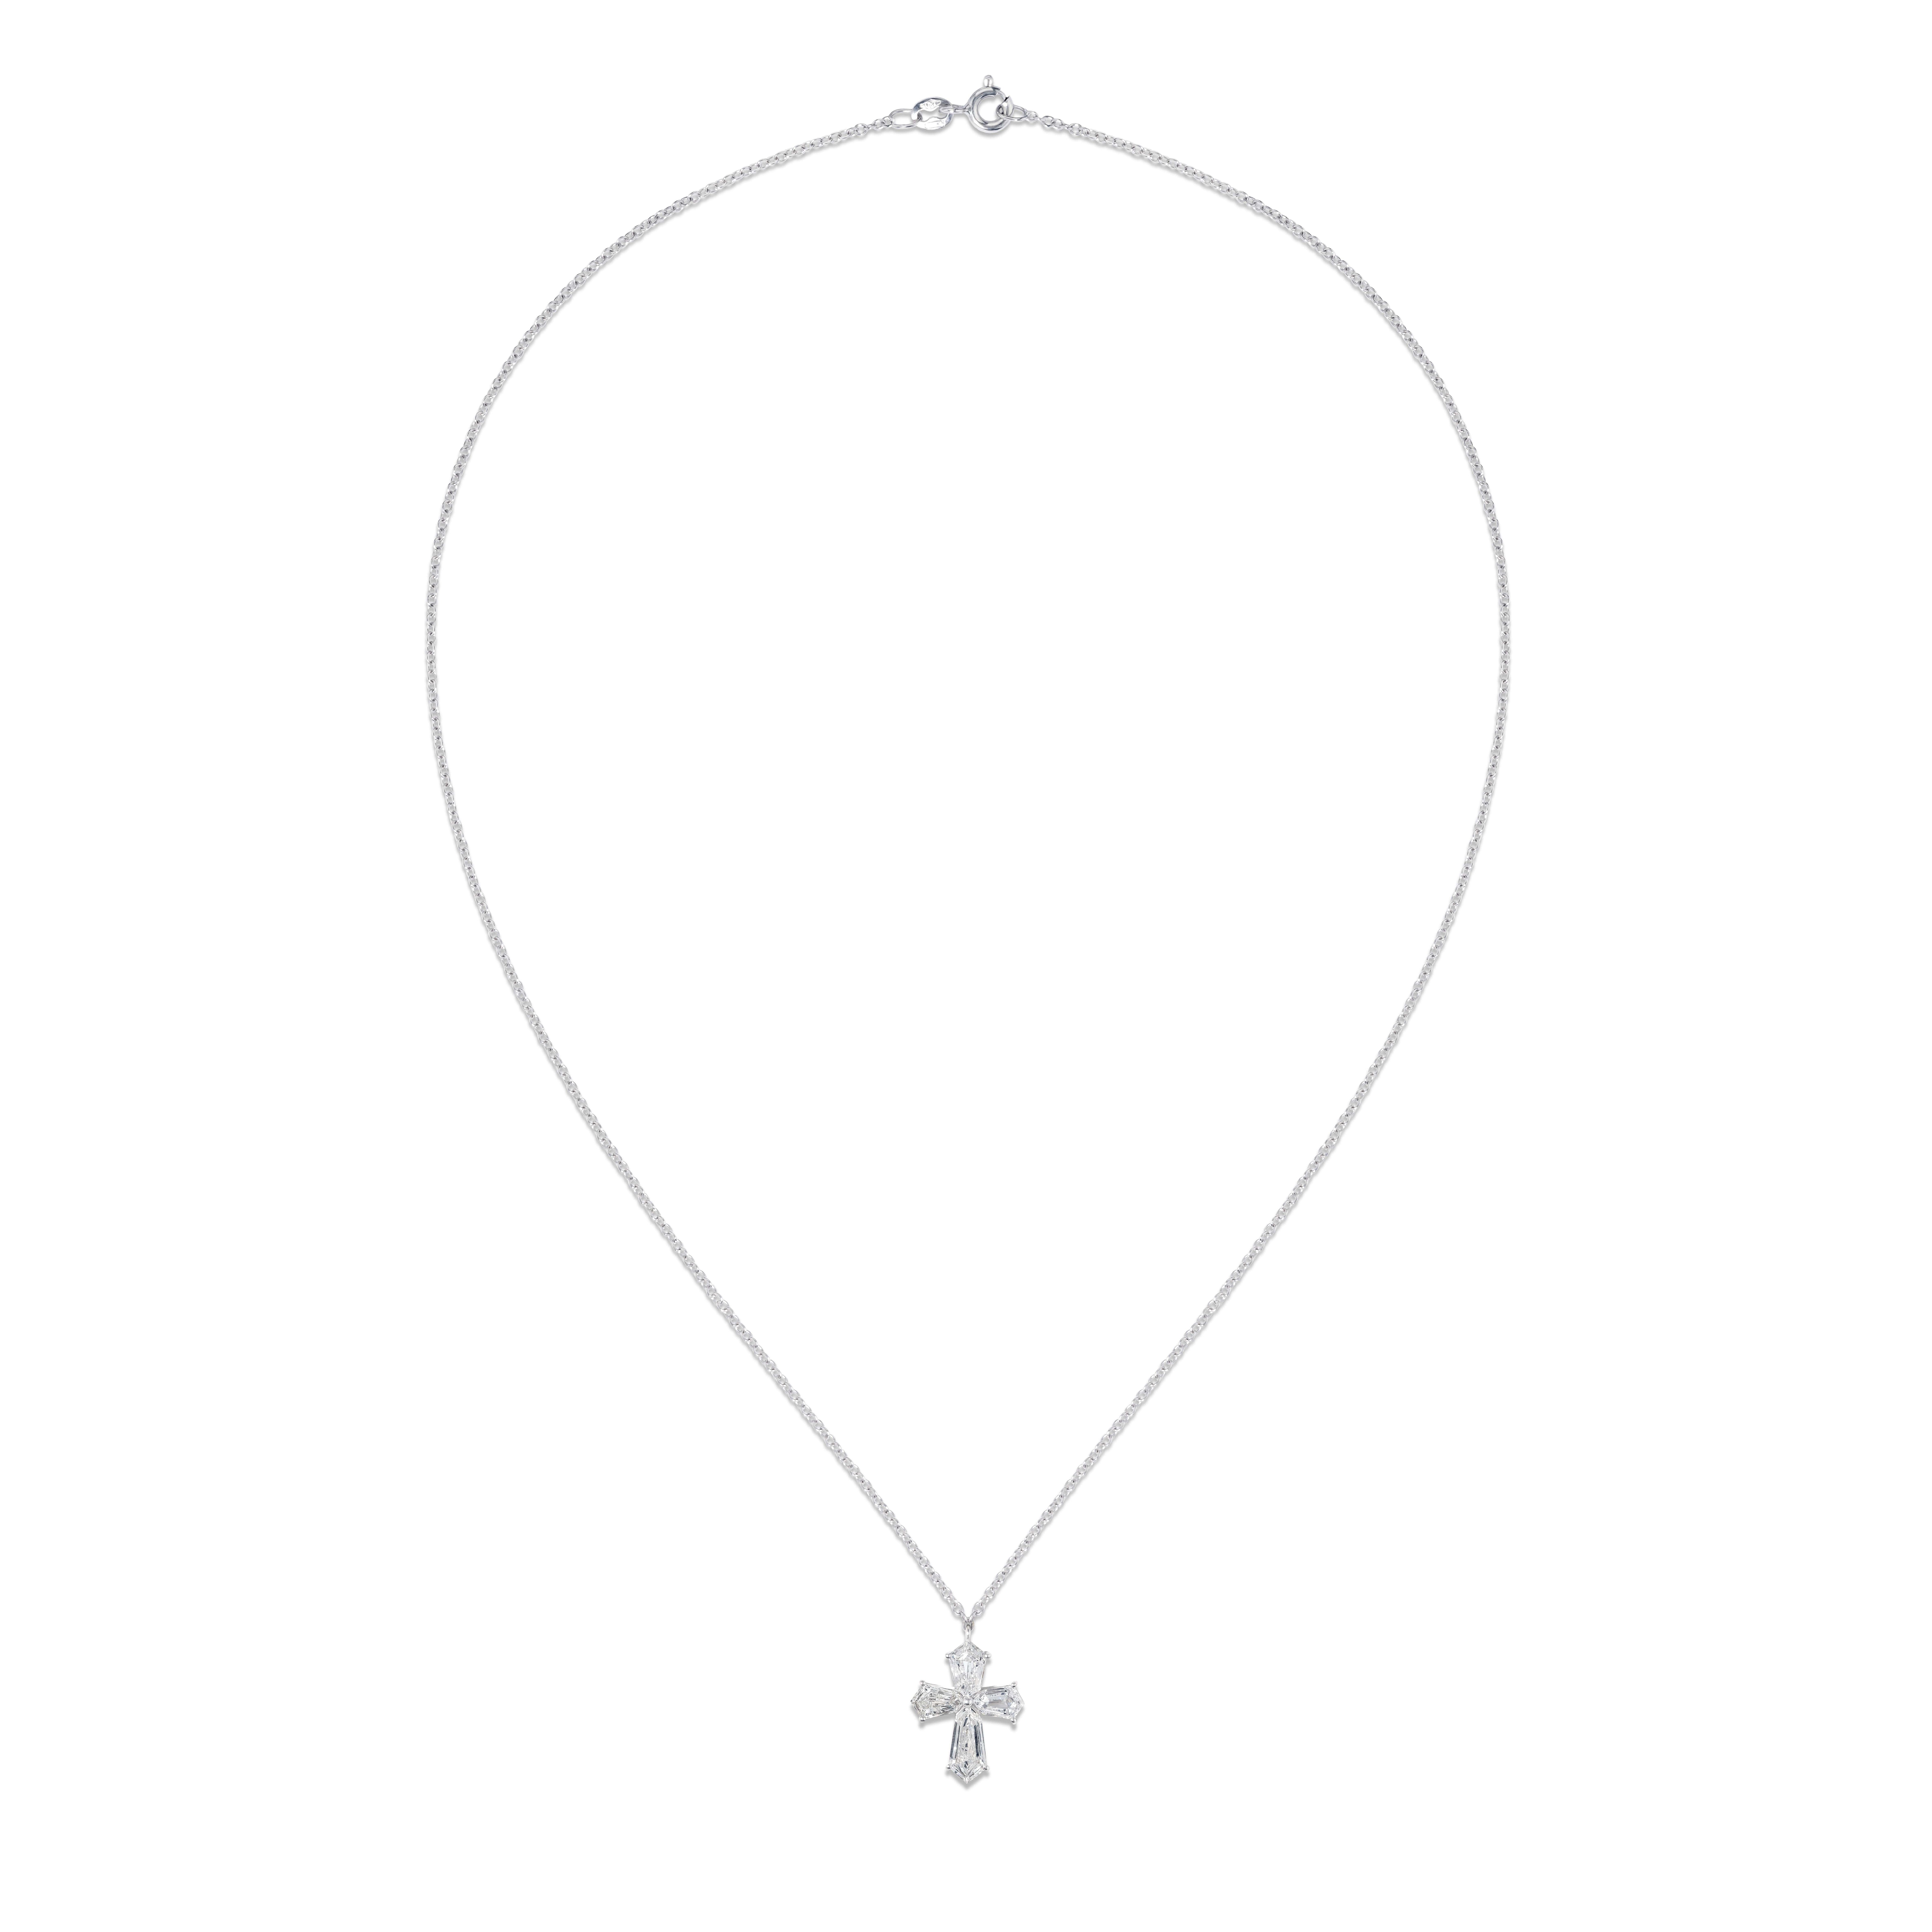 David Morris 18ct White Gold 1.93ct Cross Pendant 18ct White Gold Chain Necklace In New Condition For Sale In London, GB